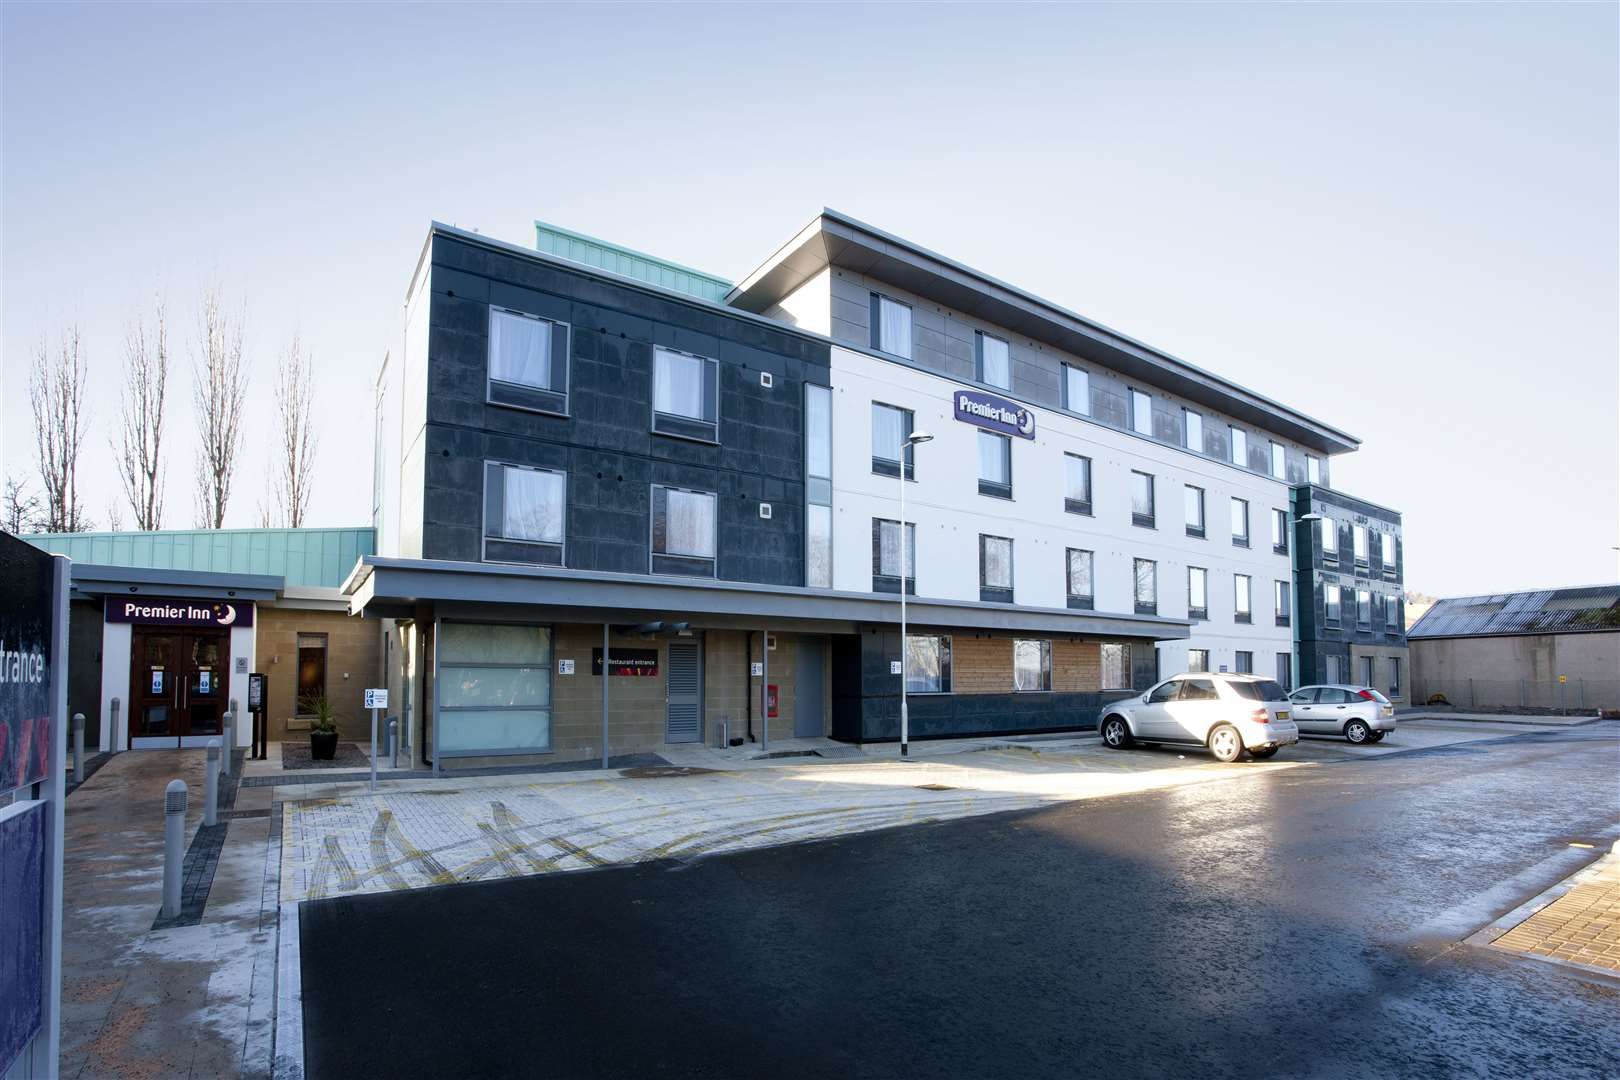 Inverness West is one of several Premier Inns that will be given additional room capacity.